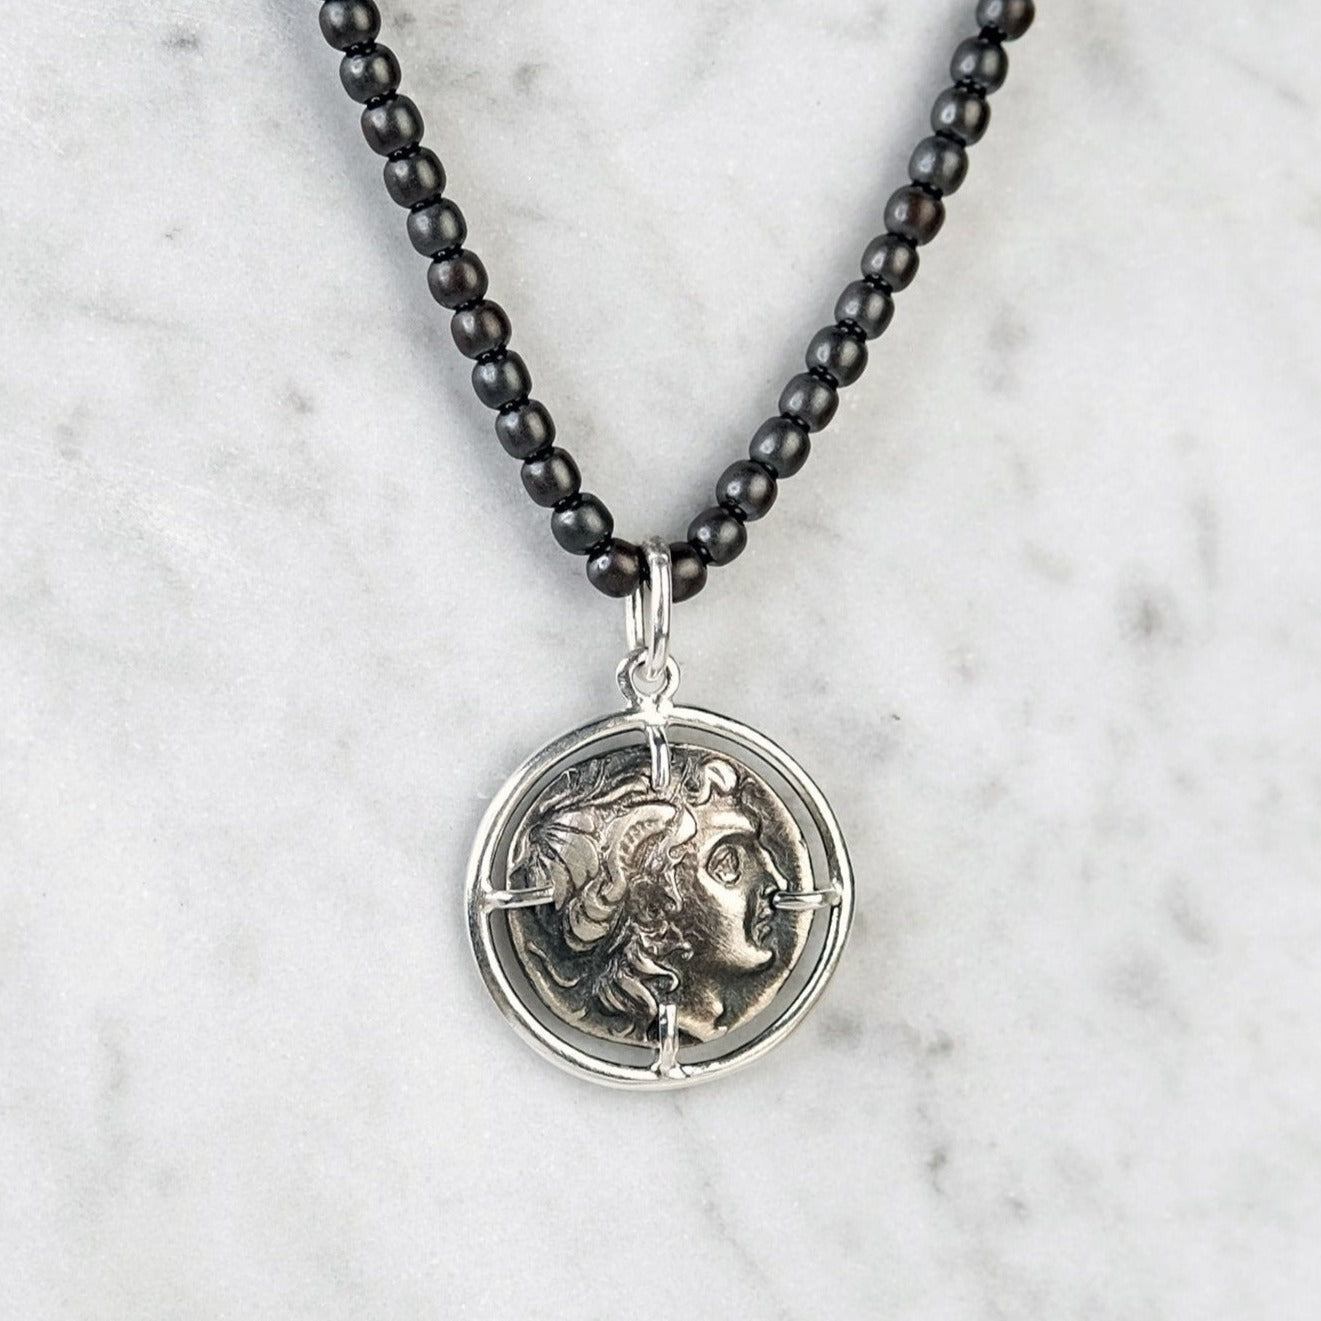 The Madstone Roman coin pendant necklace